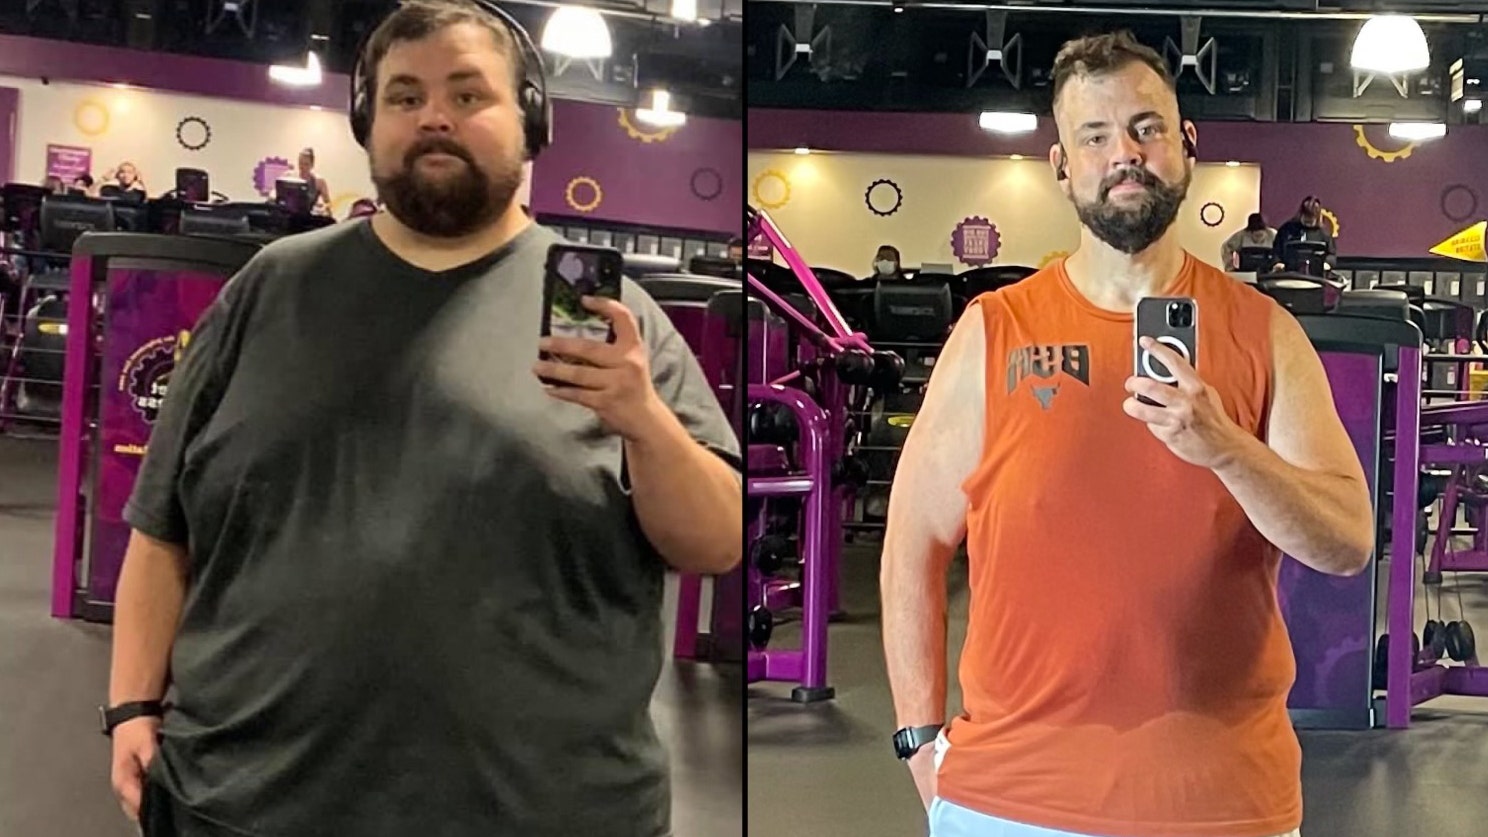 Man’s viral 240-pound weight loss transformation: ‘Anything's possible’